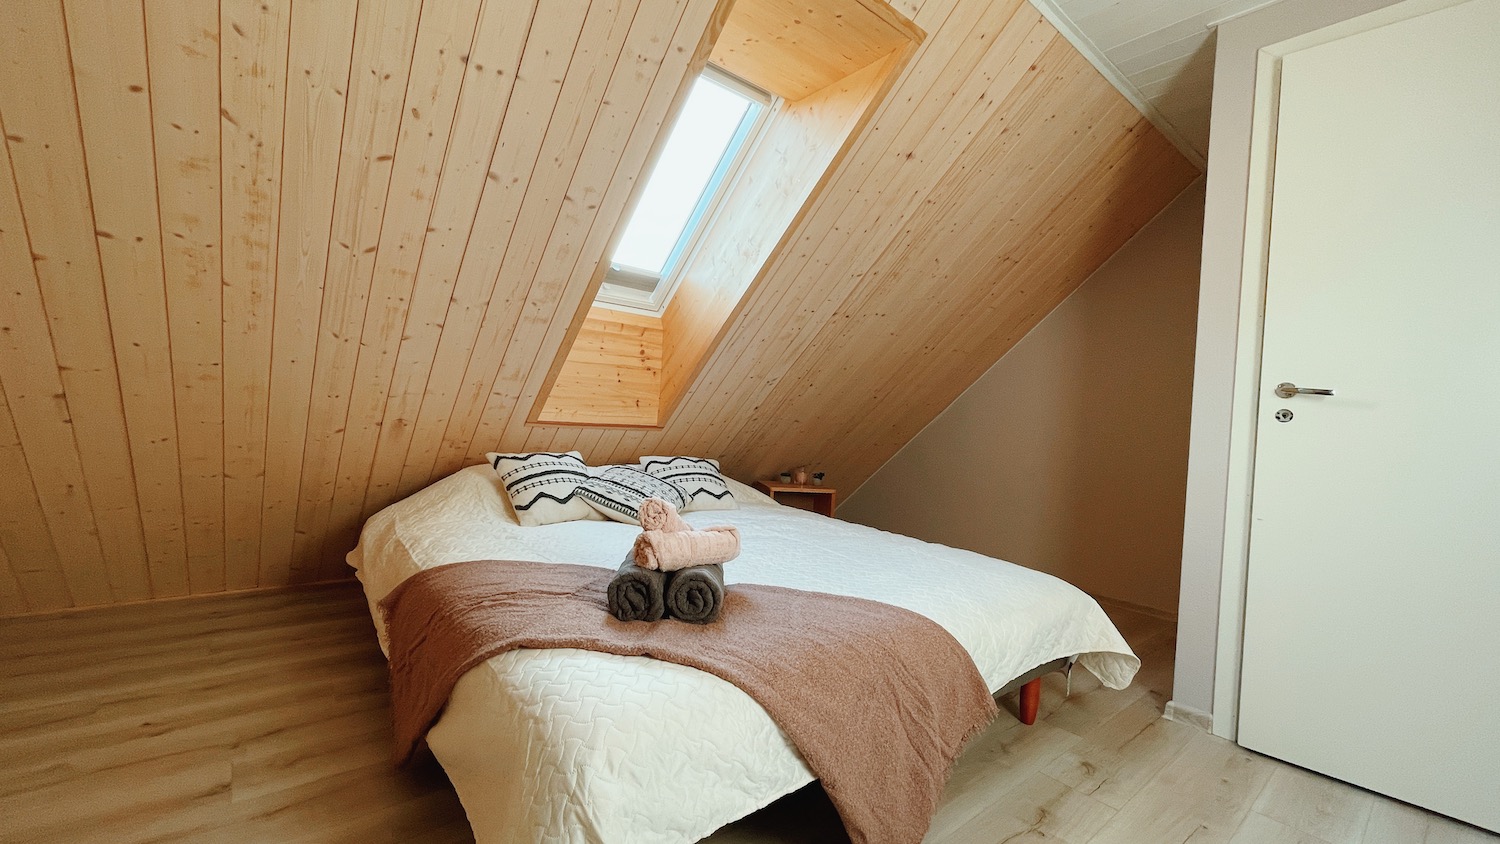 Best Estonian vacation houses in Estonia with a sauna and hot tub, Pihlaka hunting cabin, Eesti Paigad